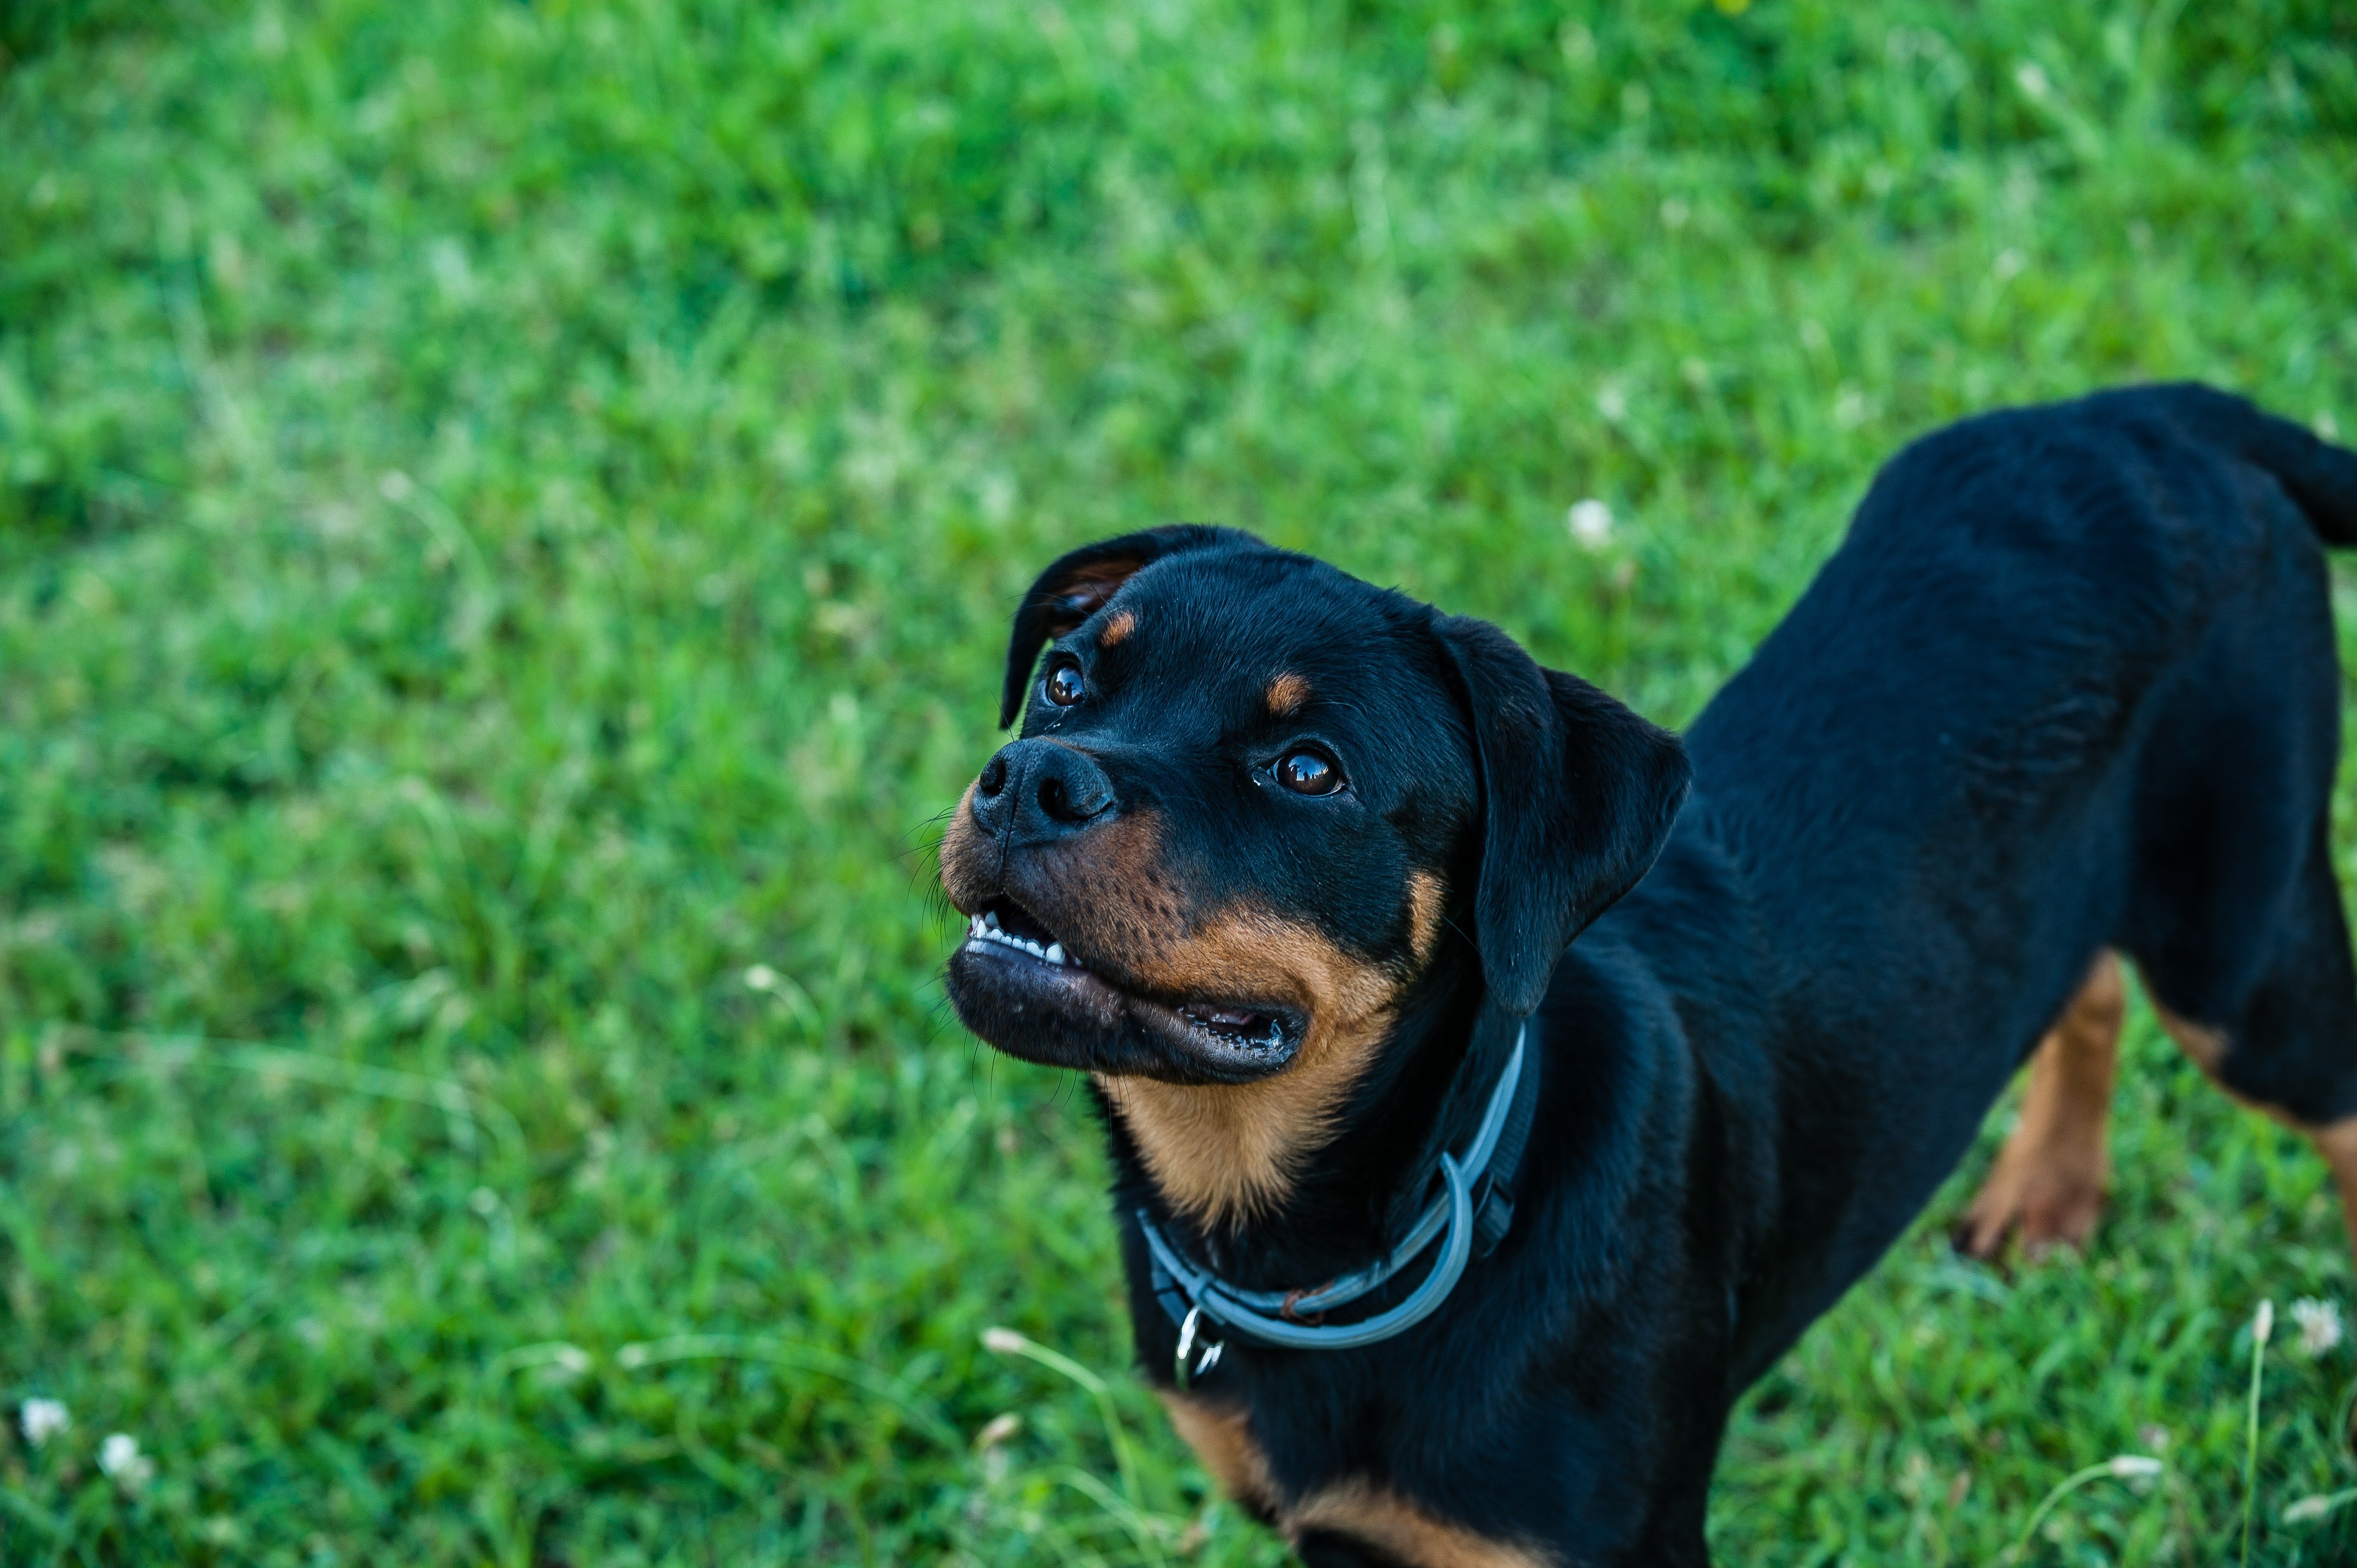 Pictured - An image of an attentive Rottweiler on green grass meadow | Source: Pexels 